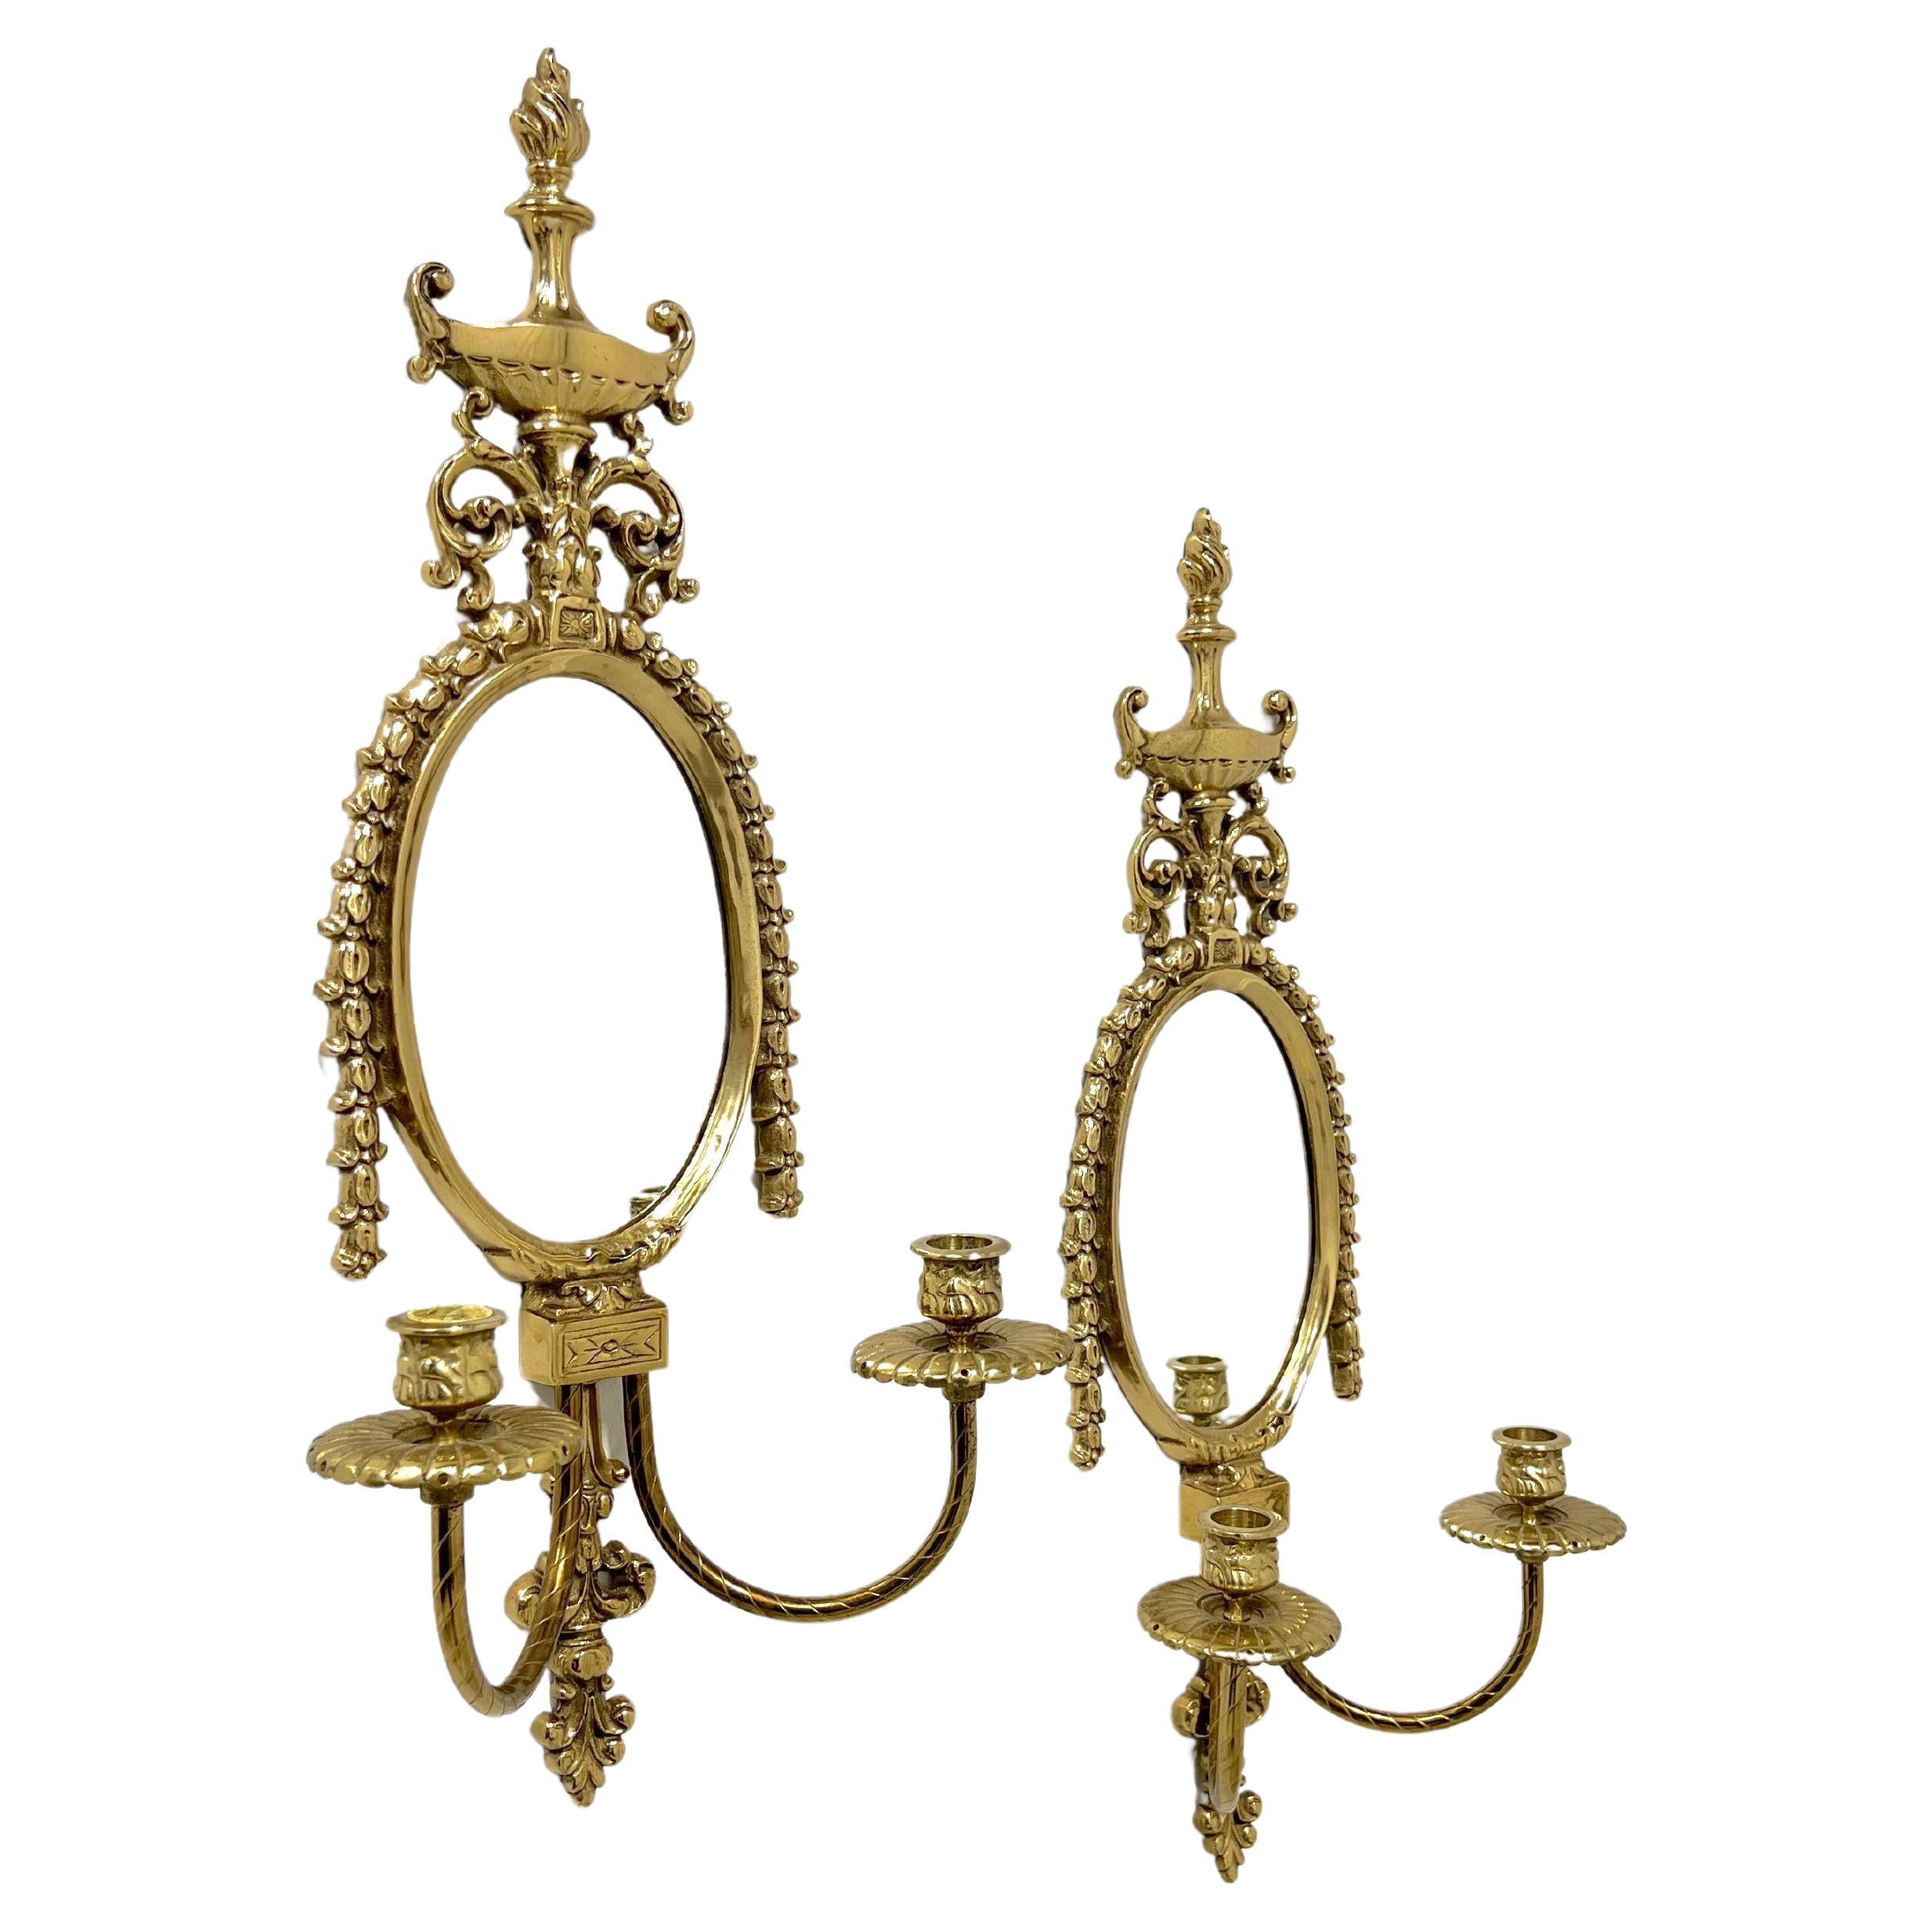 GLO-MAR ARTWORKS Mid 20th Century Brass French Provincial Candle Sconces - Pair For Sale